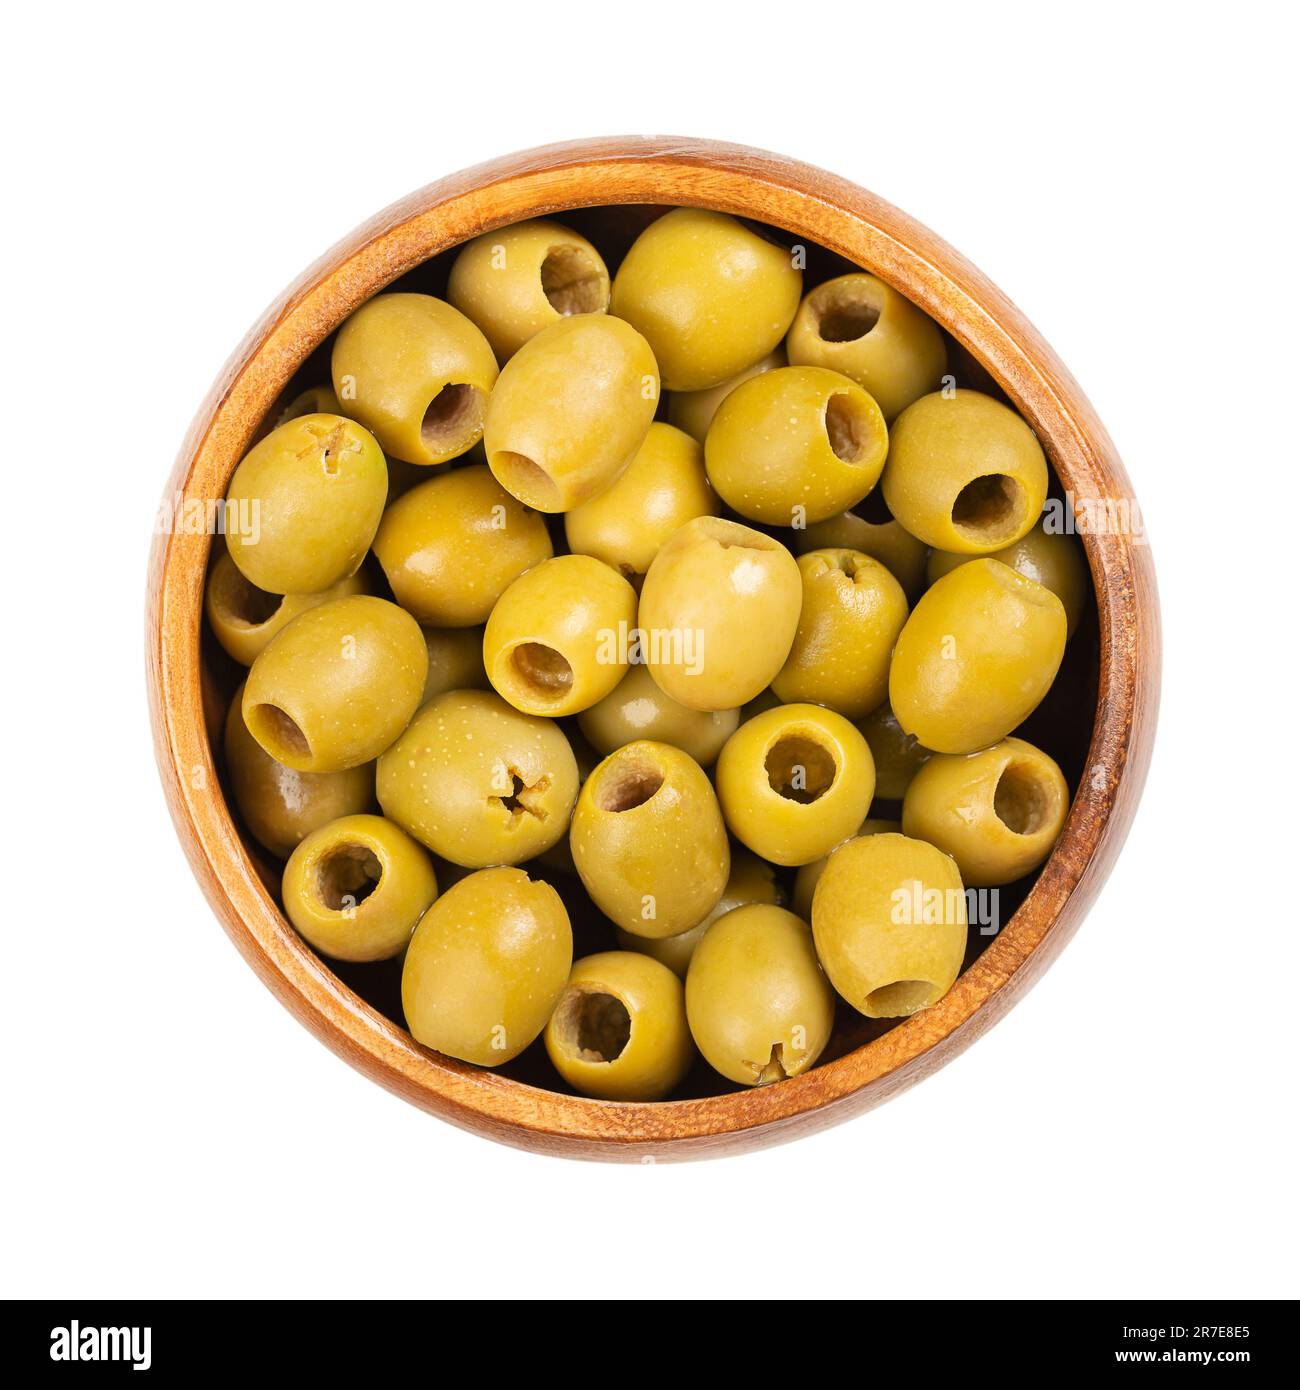 Pitted green olives for snacking, in a wooden bowl. Ready to eat, small table olives from Spain, processed after kernel removing, preserved in brine. Stock Photo